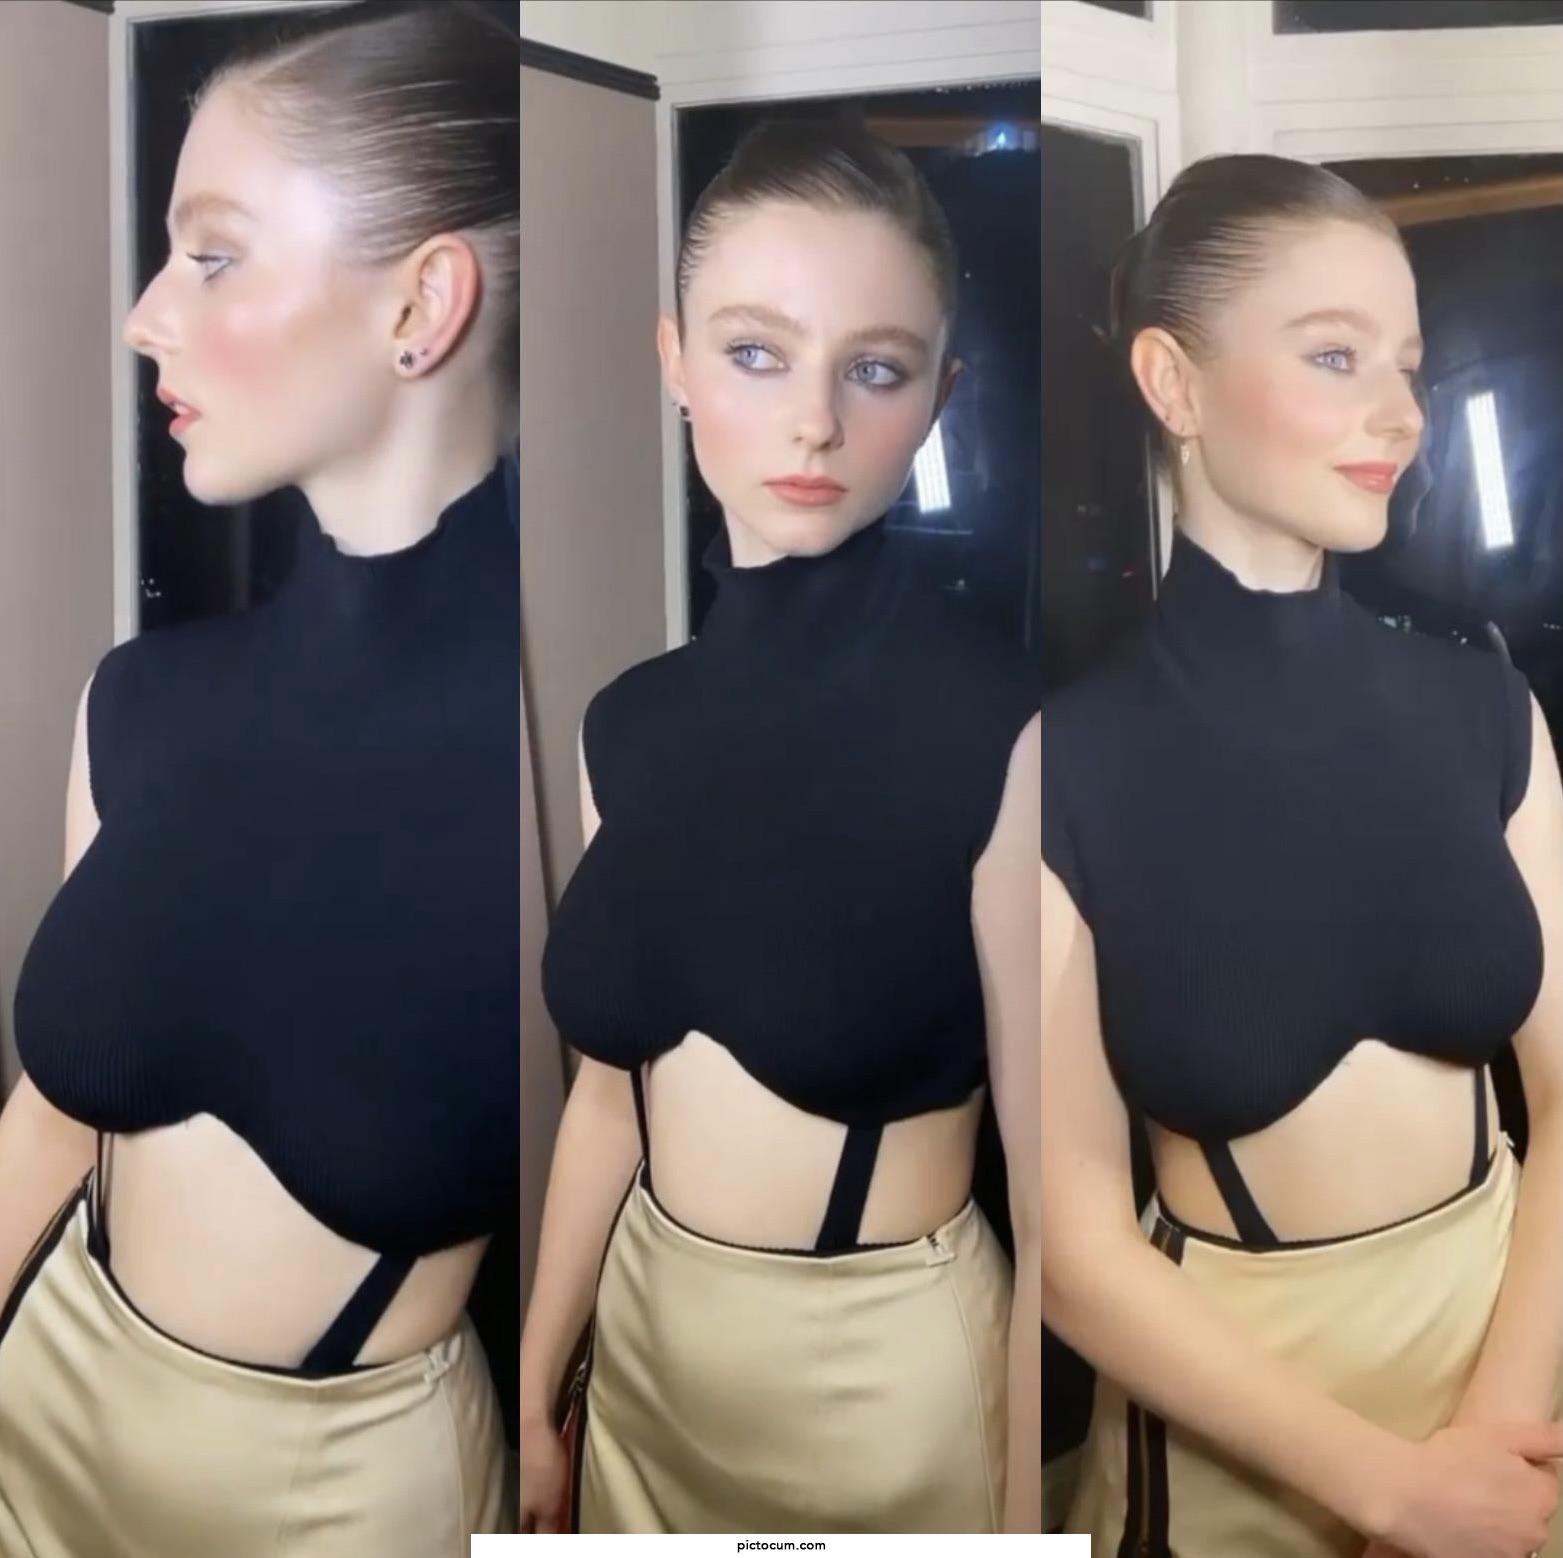 Thomasin McKenzie has become a beautiful young woman